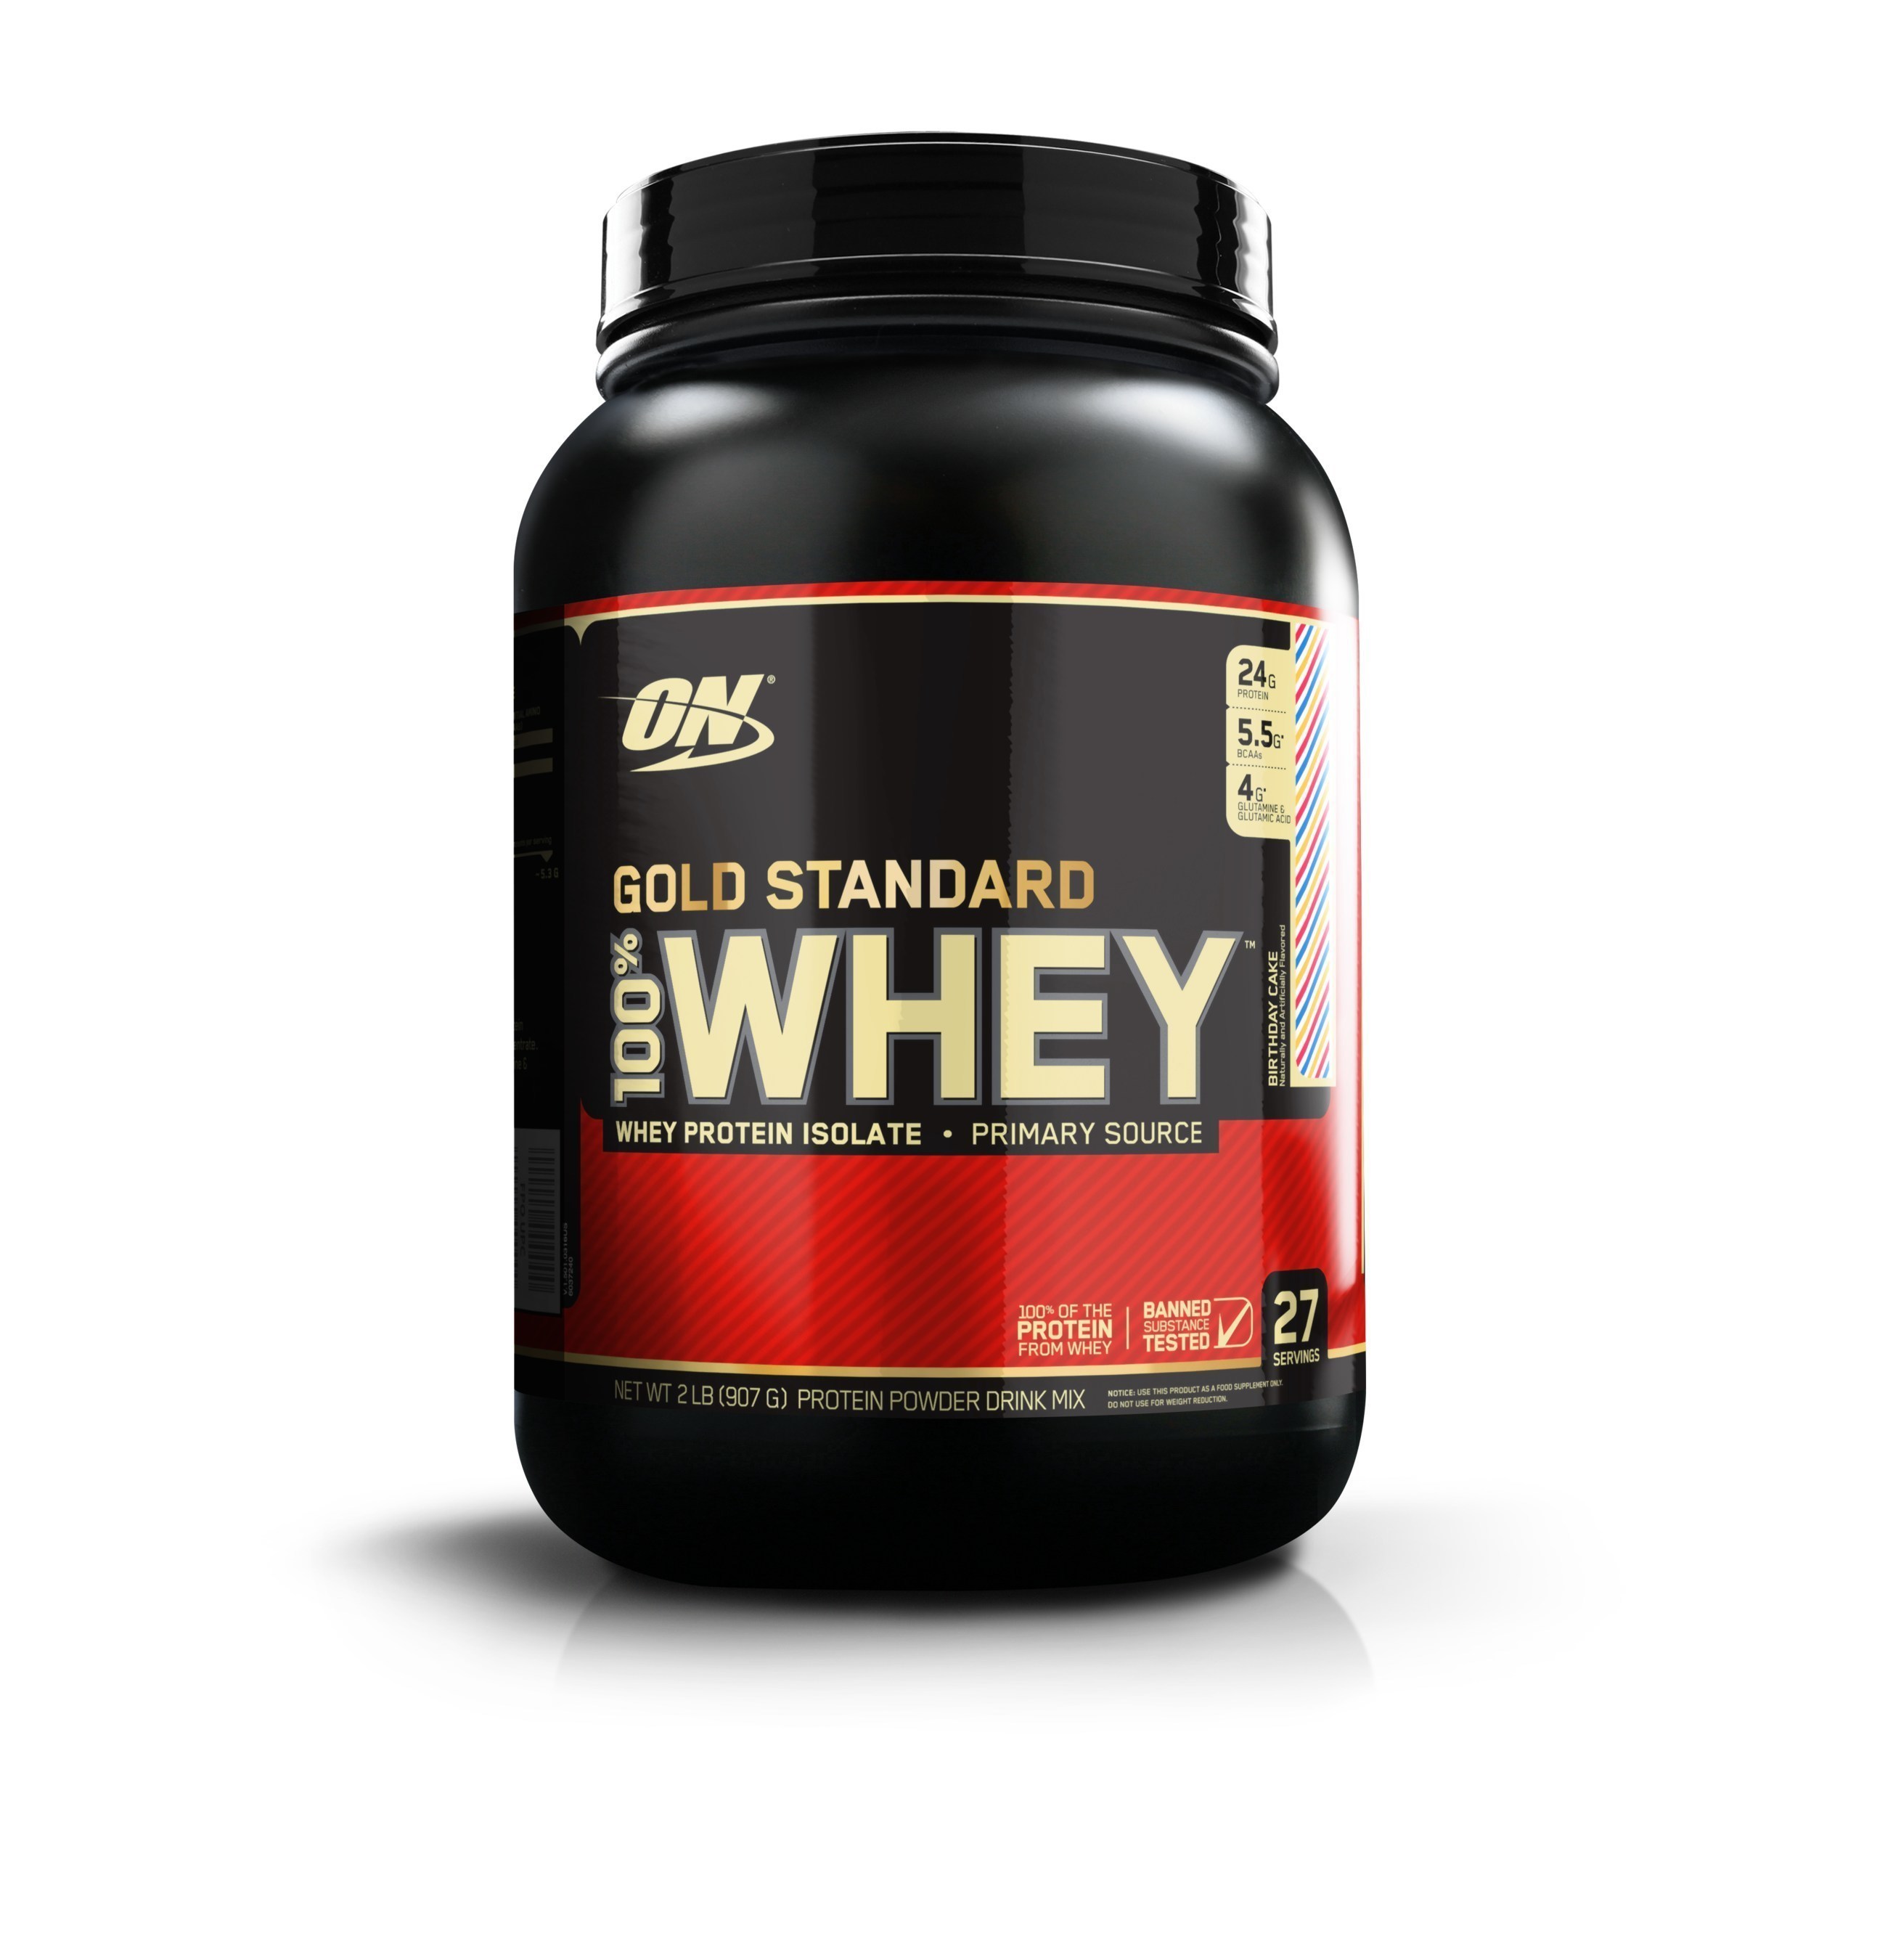 Category Leader Optimum Nutrition Commemorates Three Decades of Evolution and Innovation; Marks Occasion with Limited Edition Birthday Cake Flavor of Signature GOLD STANDARD 100% WHEY Product